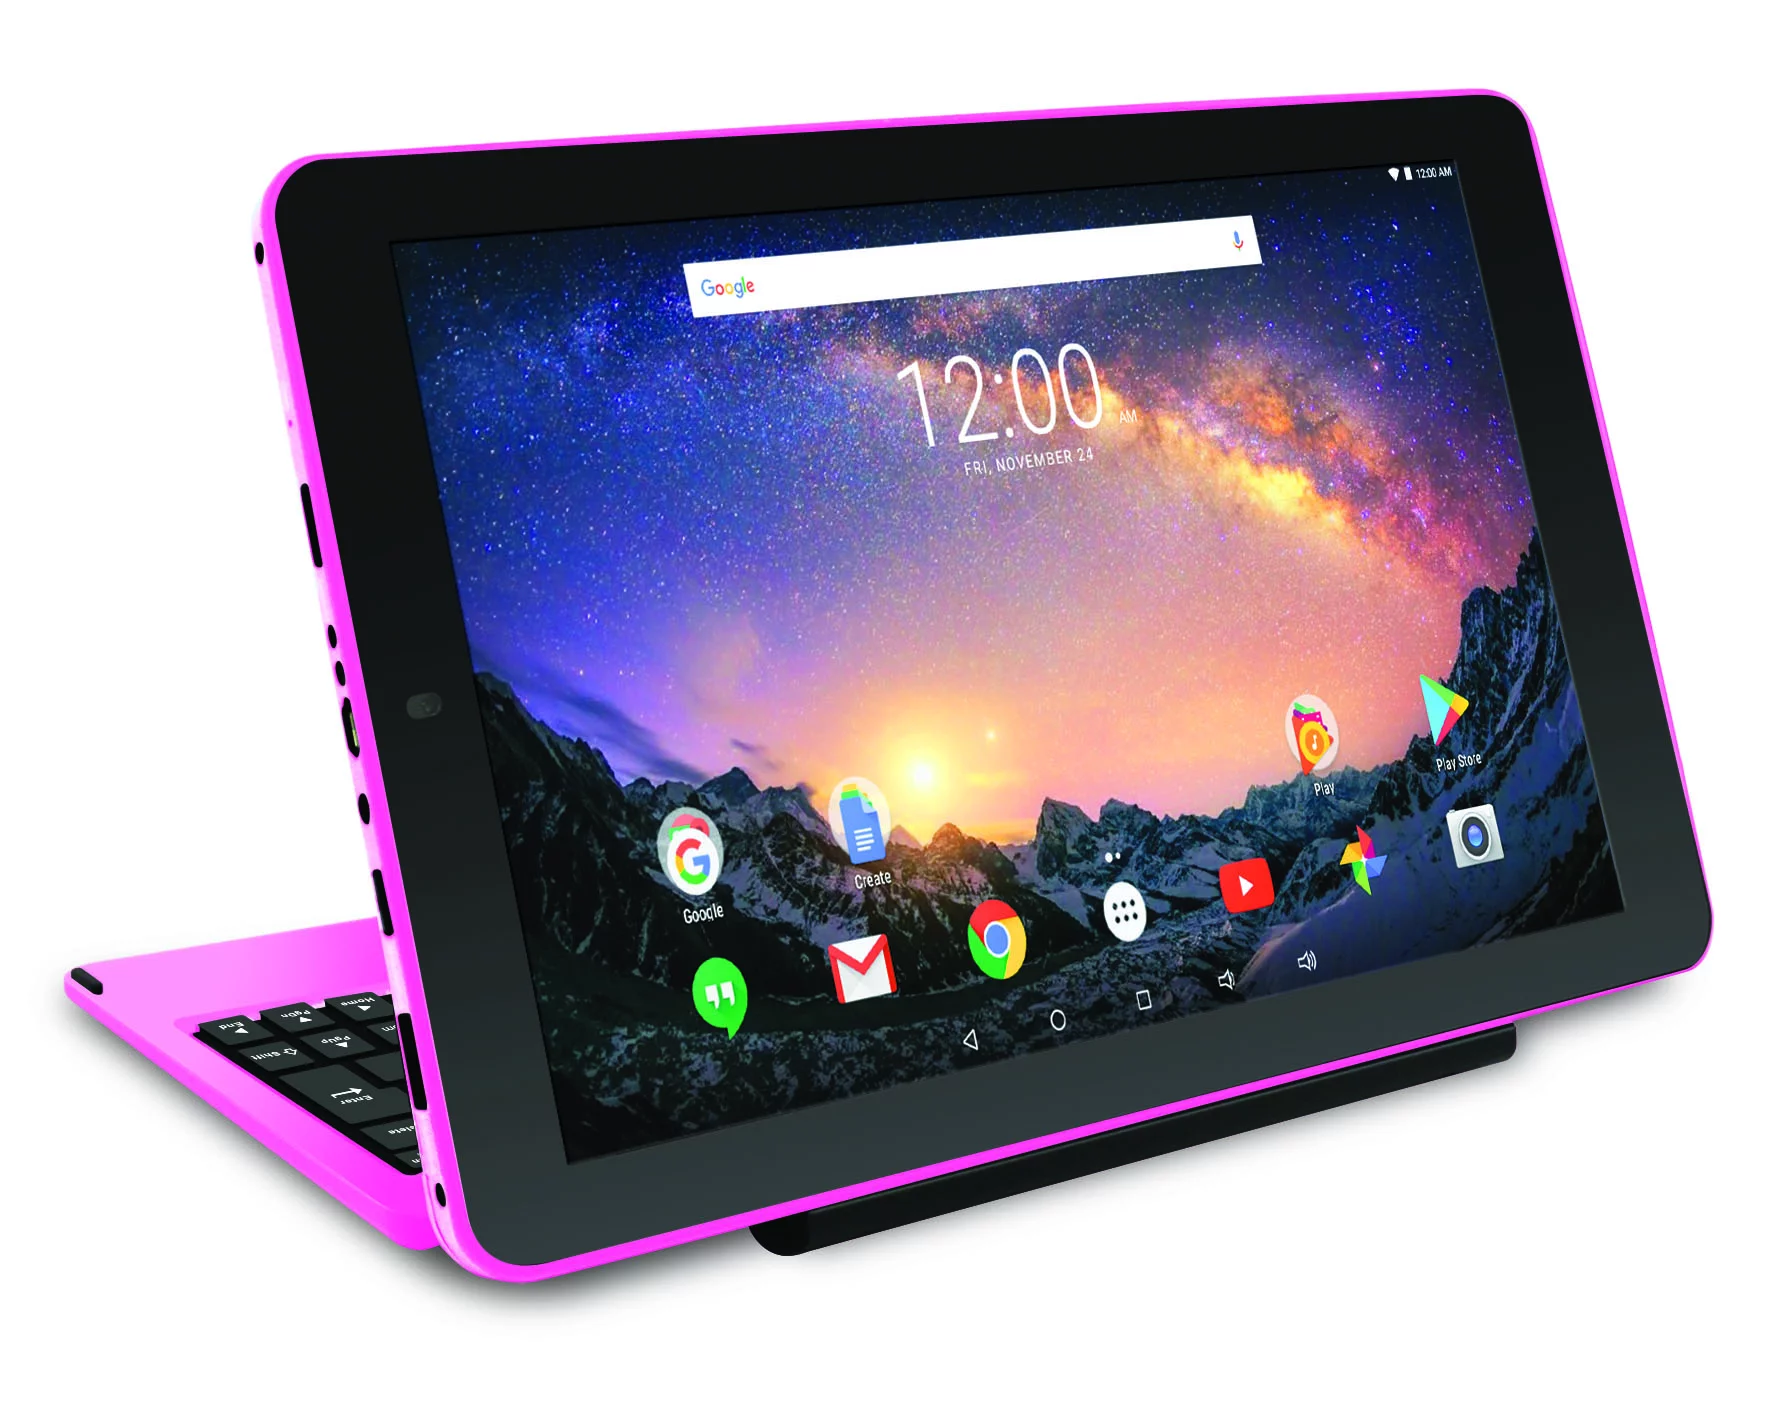 RCA Galileo Pro 11.5" 32GB 2-in-1 Tablet with Keyboard Case Android OS, Pink (Google Classroom Ready)